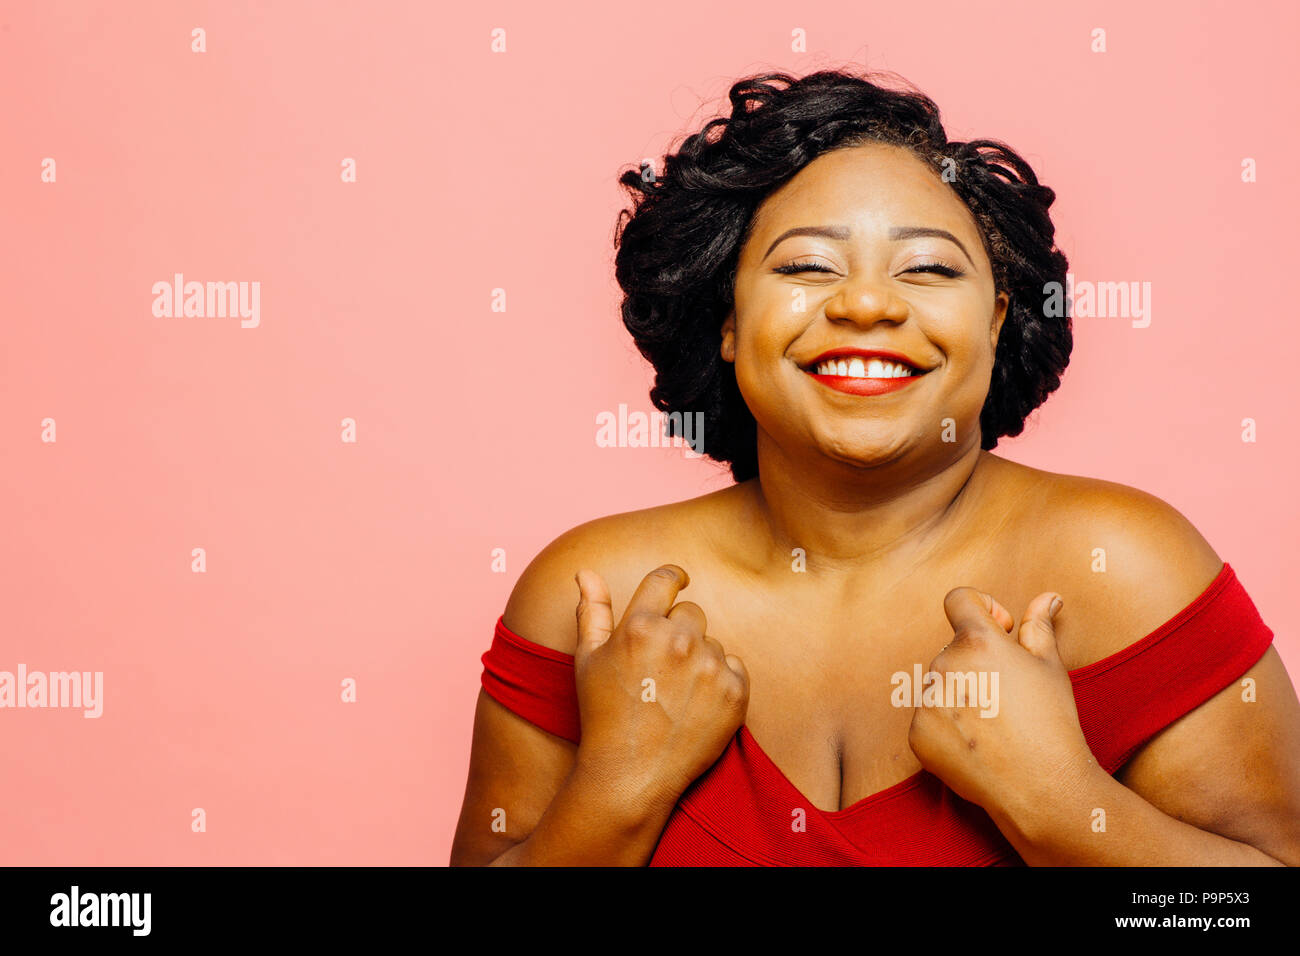 Pure joy Portrait of a happy smiling woman with eyes closed and big smile showing teeth Stock Photo